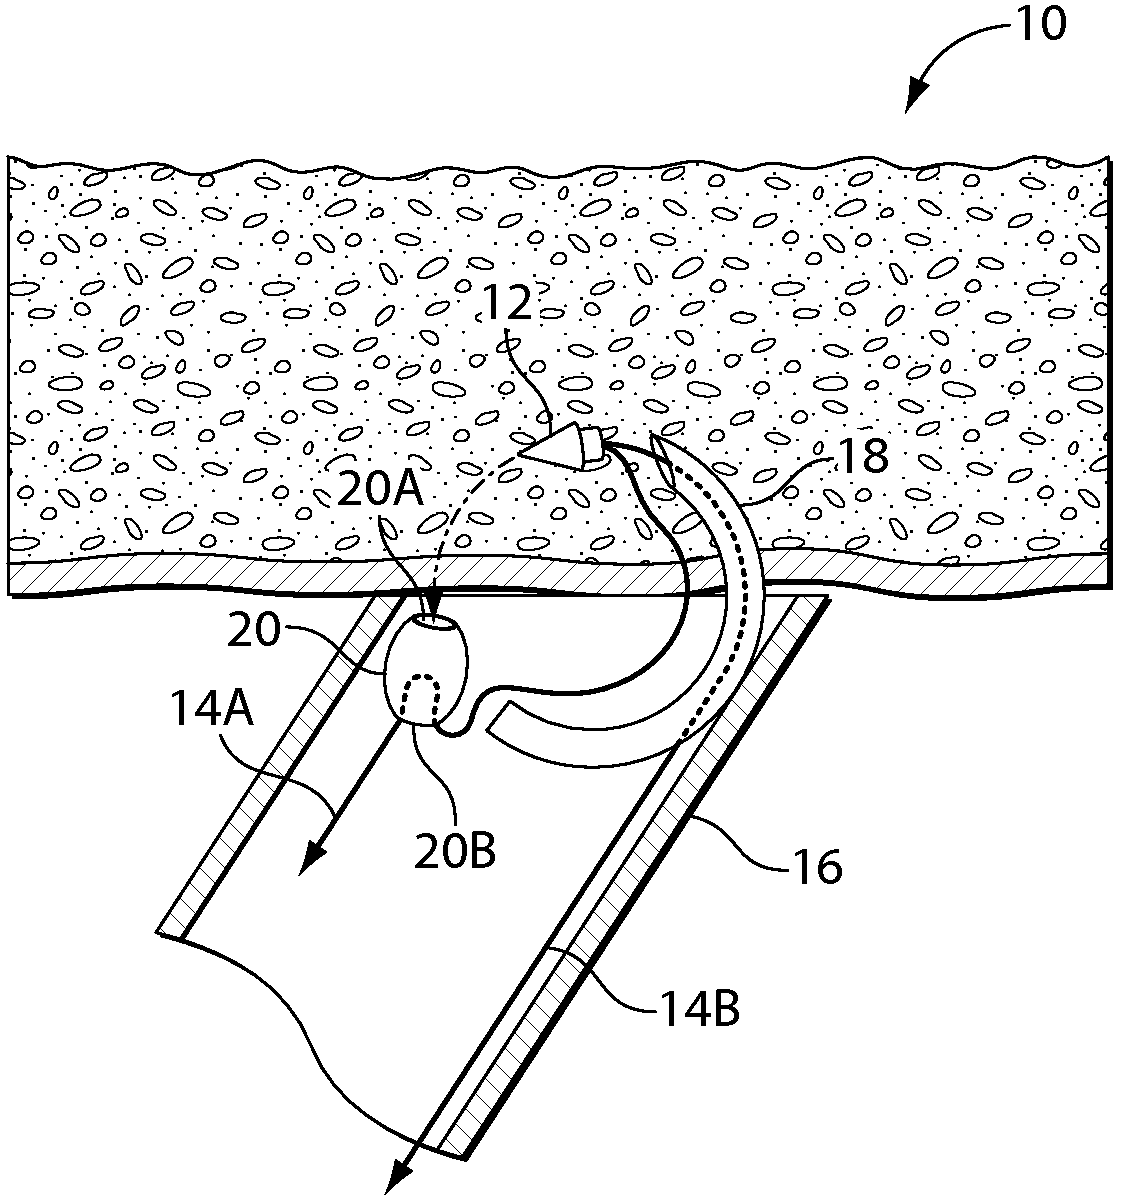 Systems and methods for soft tissue reconstruction